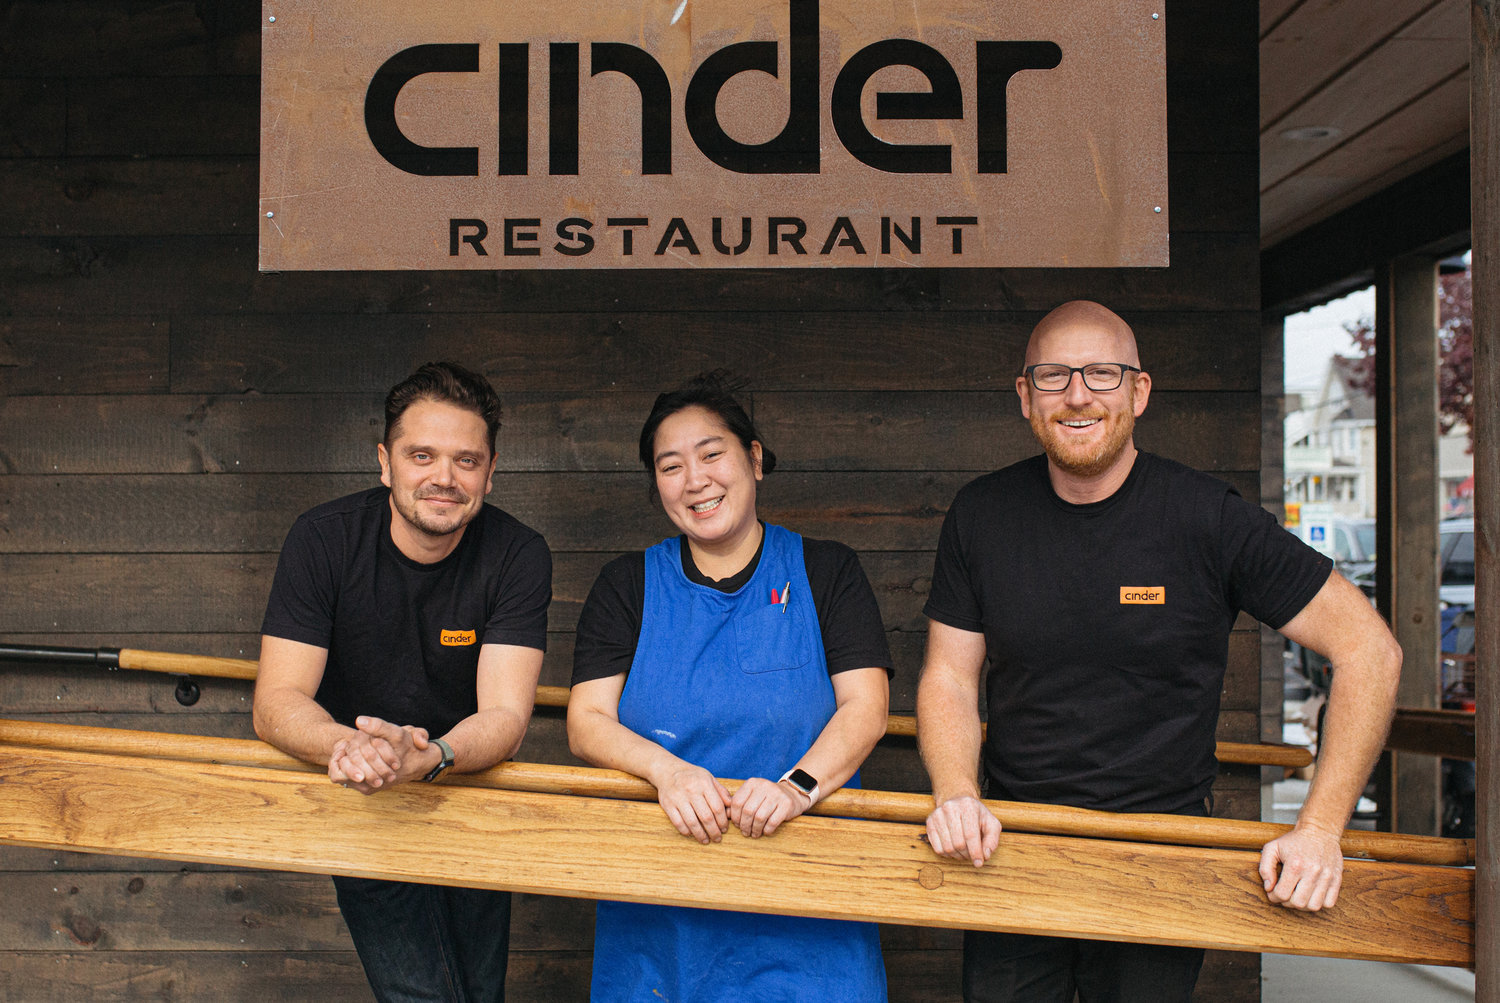 Cinder co-owners (L-R) Sam Agnello Jr. and Rory Douthit flank chef Maria Trager